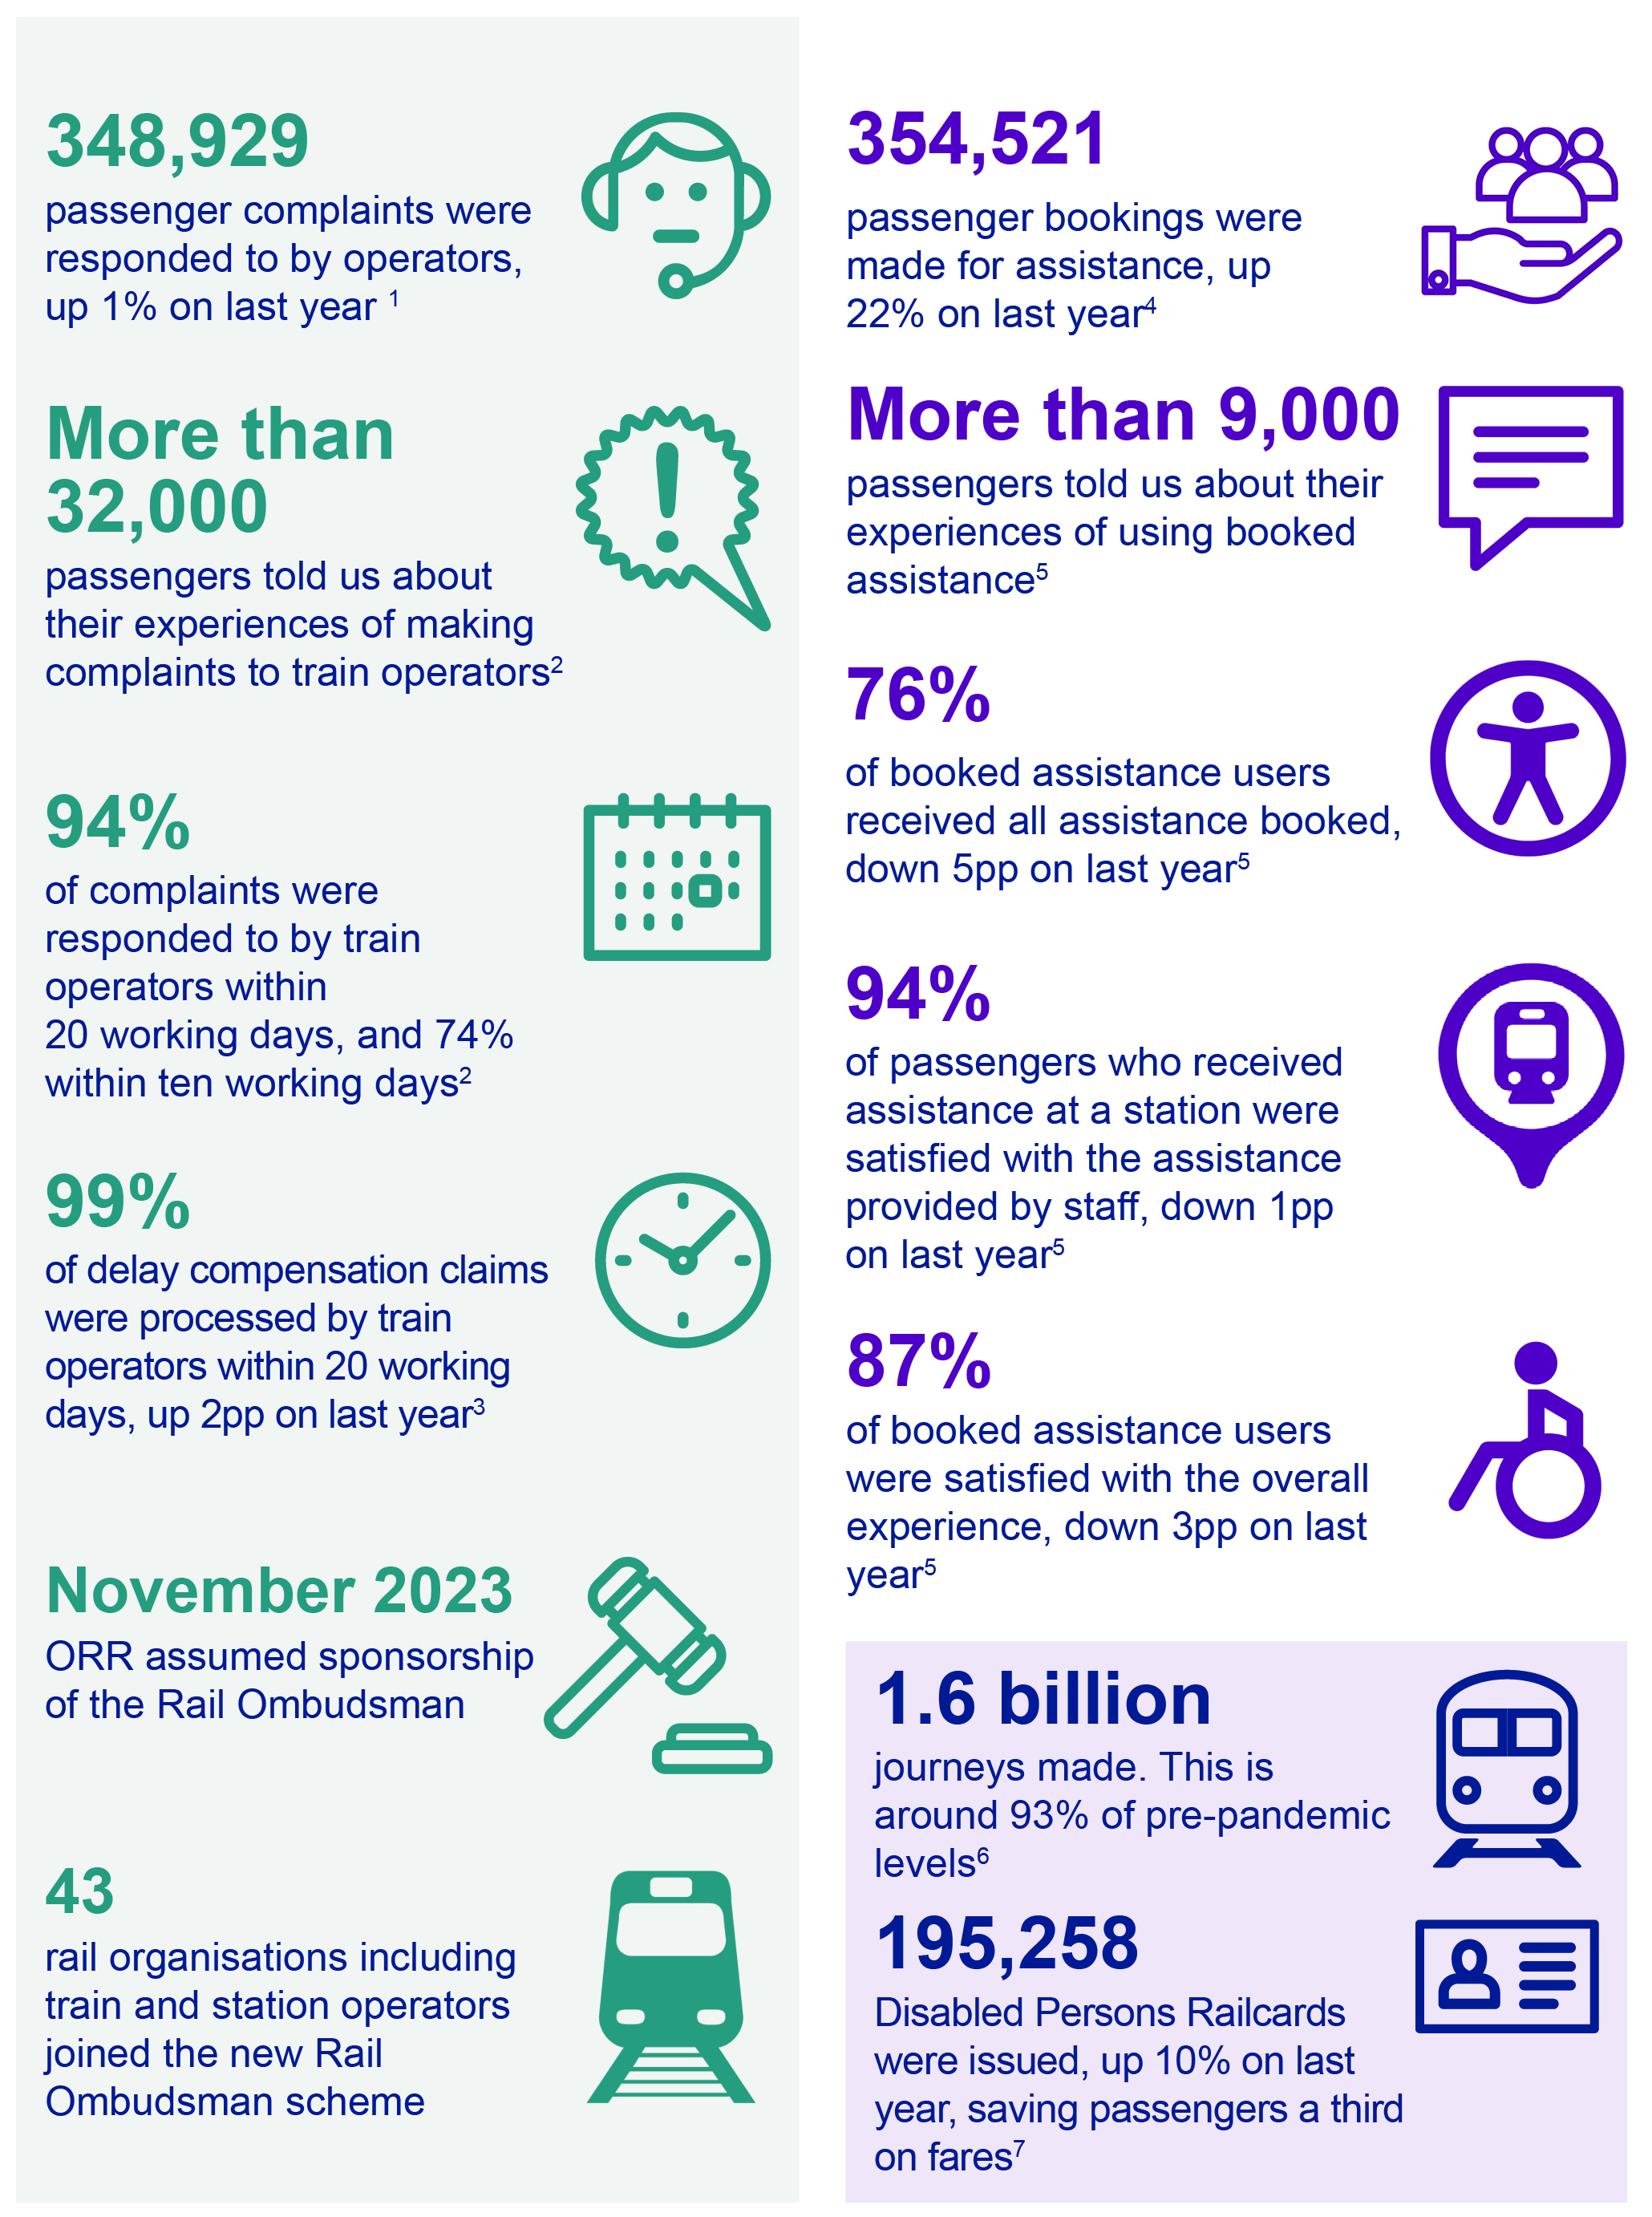 348,929 passenger complaints were responded to by operators, up 1% on last year. Source: 1. More than 32,000 passengers told us about their experiences of making complaints to train operators. Source: 2. 94% of complaints were responded to by train operators within 20 working days, and 74% within ten working days. Source: 2. 99% of delay compensation claims were processed by operators within 20 working days, up 2pp on last year. Source: 3. November 2023 ORR assumed sponsorship of the Rail Ombudsman. 43 rail organisations including train and station operators joined the new Rail Ombudsman scheme. 354,521 passenger bookings were made for assistance, up 22% on last year. Source: 4. More than 9,000 passengers told us about their experiences of using booked assistance. Source: 5. 76% of booked assistance users received all assistance booked, down 5pp on last year. Source: 5. 94% of passengers who received assistance at a station were satisfied with the assistance provided by staff, down 1pp on last year. Source: 5. 87% of booked assistance users were satisfied with their overall experience, down 3pp on last year. Source: 5. 1.6 billion journeys made. This is around 93% of pre-pandemic levels. Source: 6. 195,258 Disabled Persons Railcards were issued, up 10% on last year, saving passengers a third on fares. Source: 7.